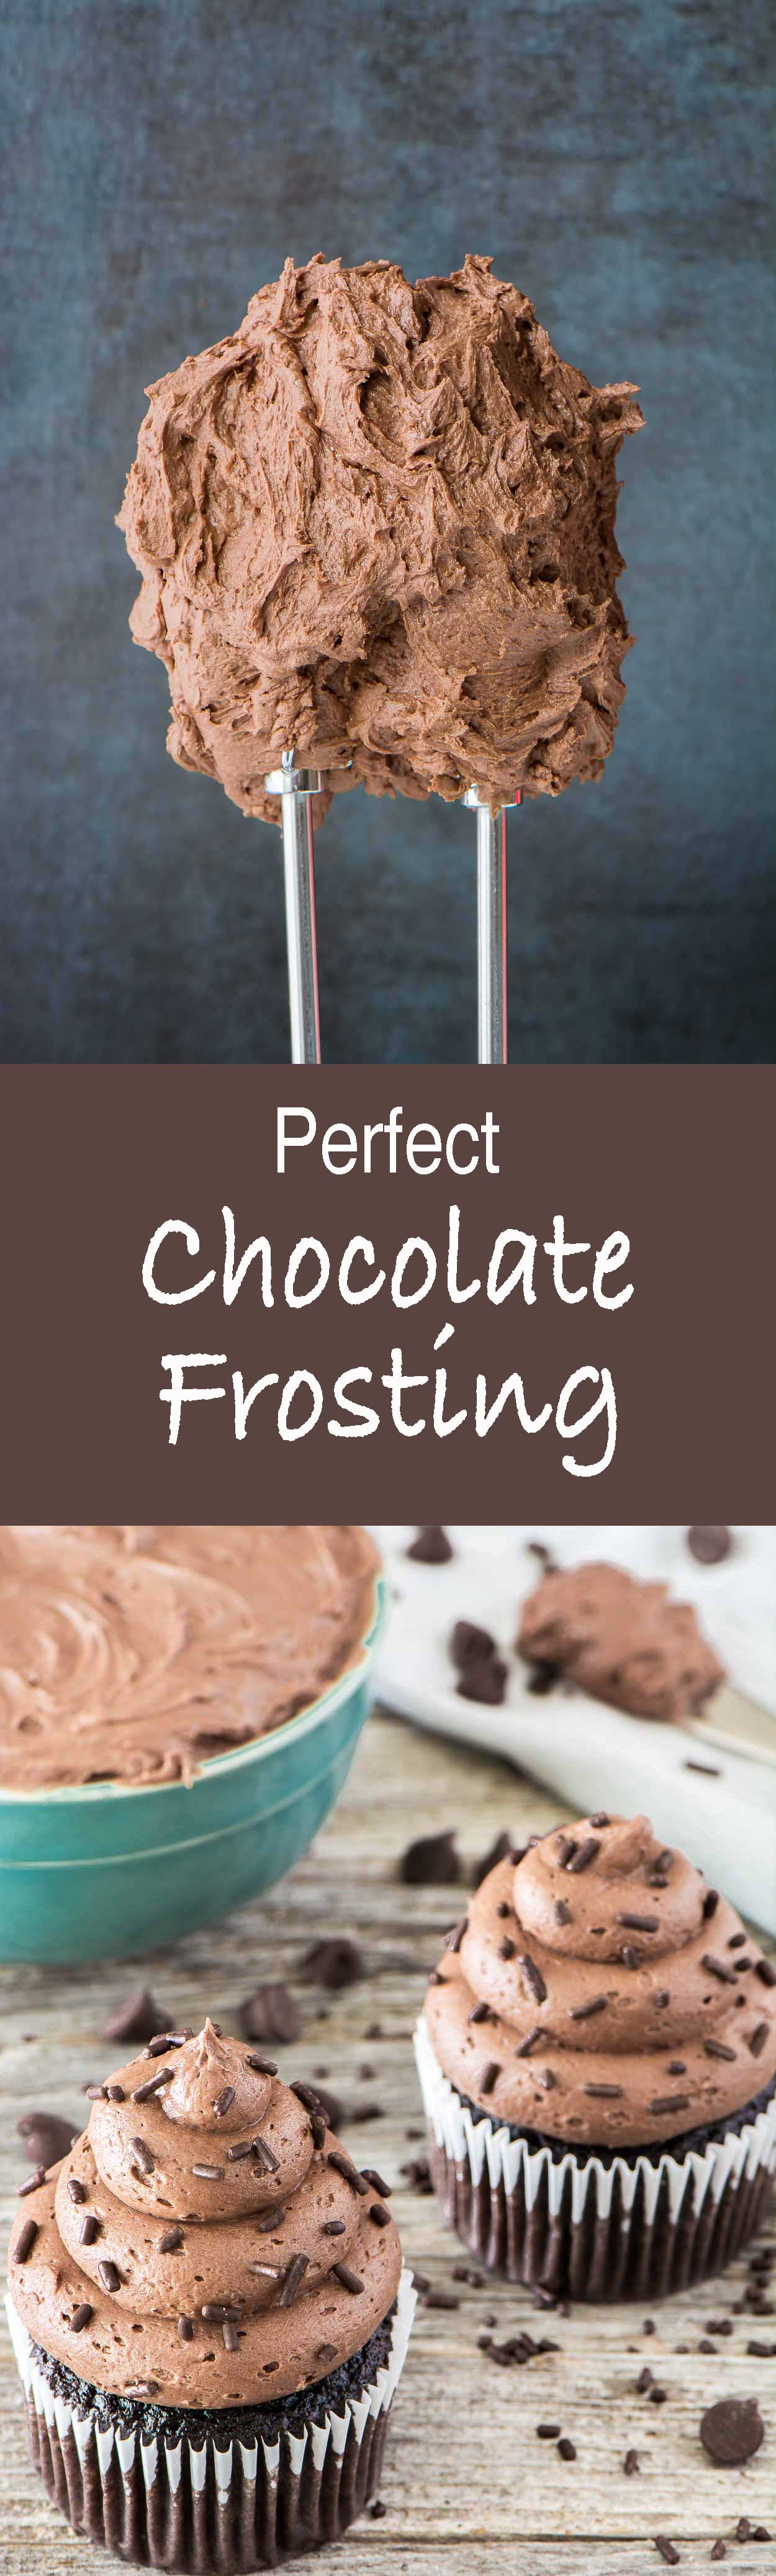 Easy to make, smooth and creamy, this is the most perfect chocolate frosting recipe you will ever need.